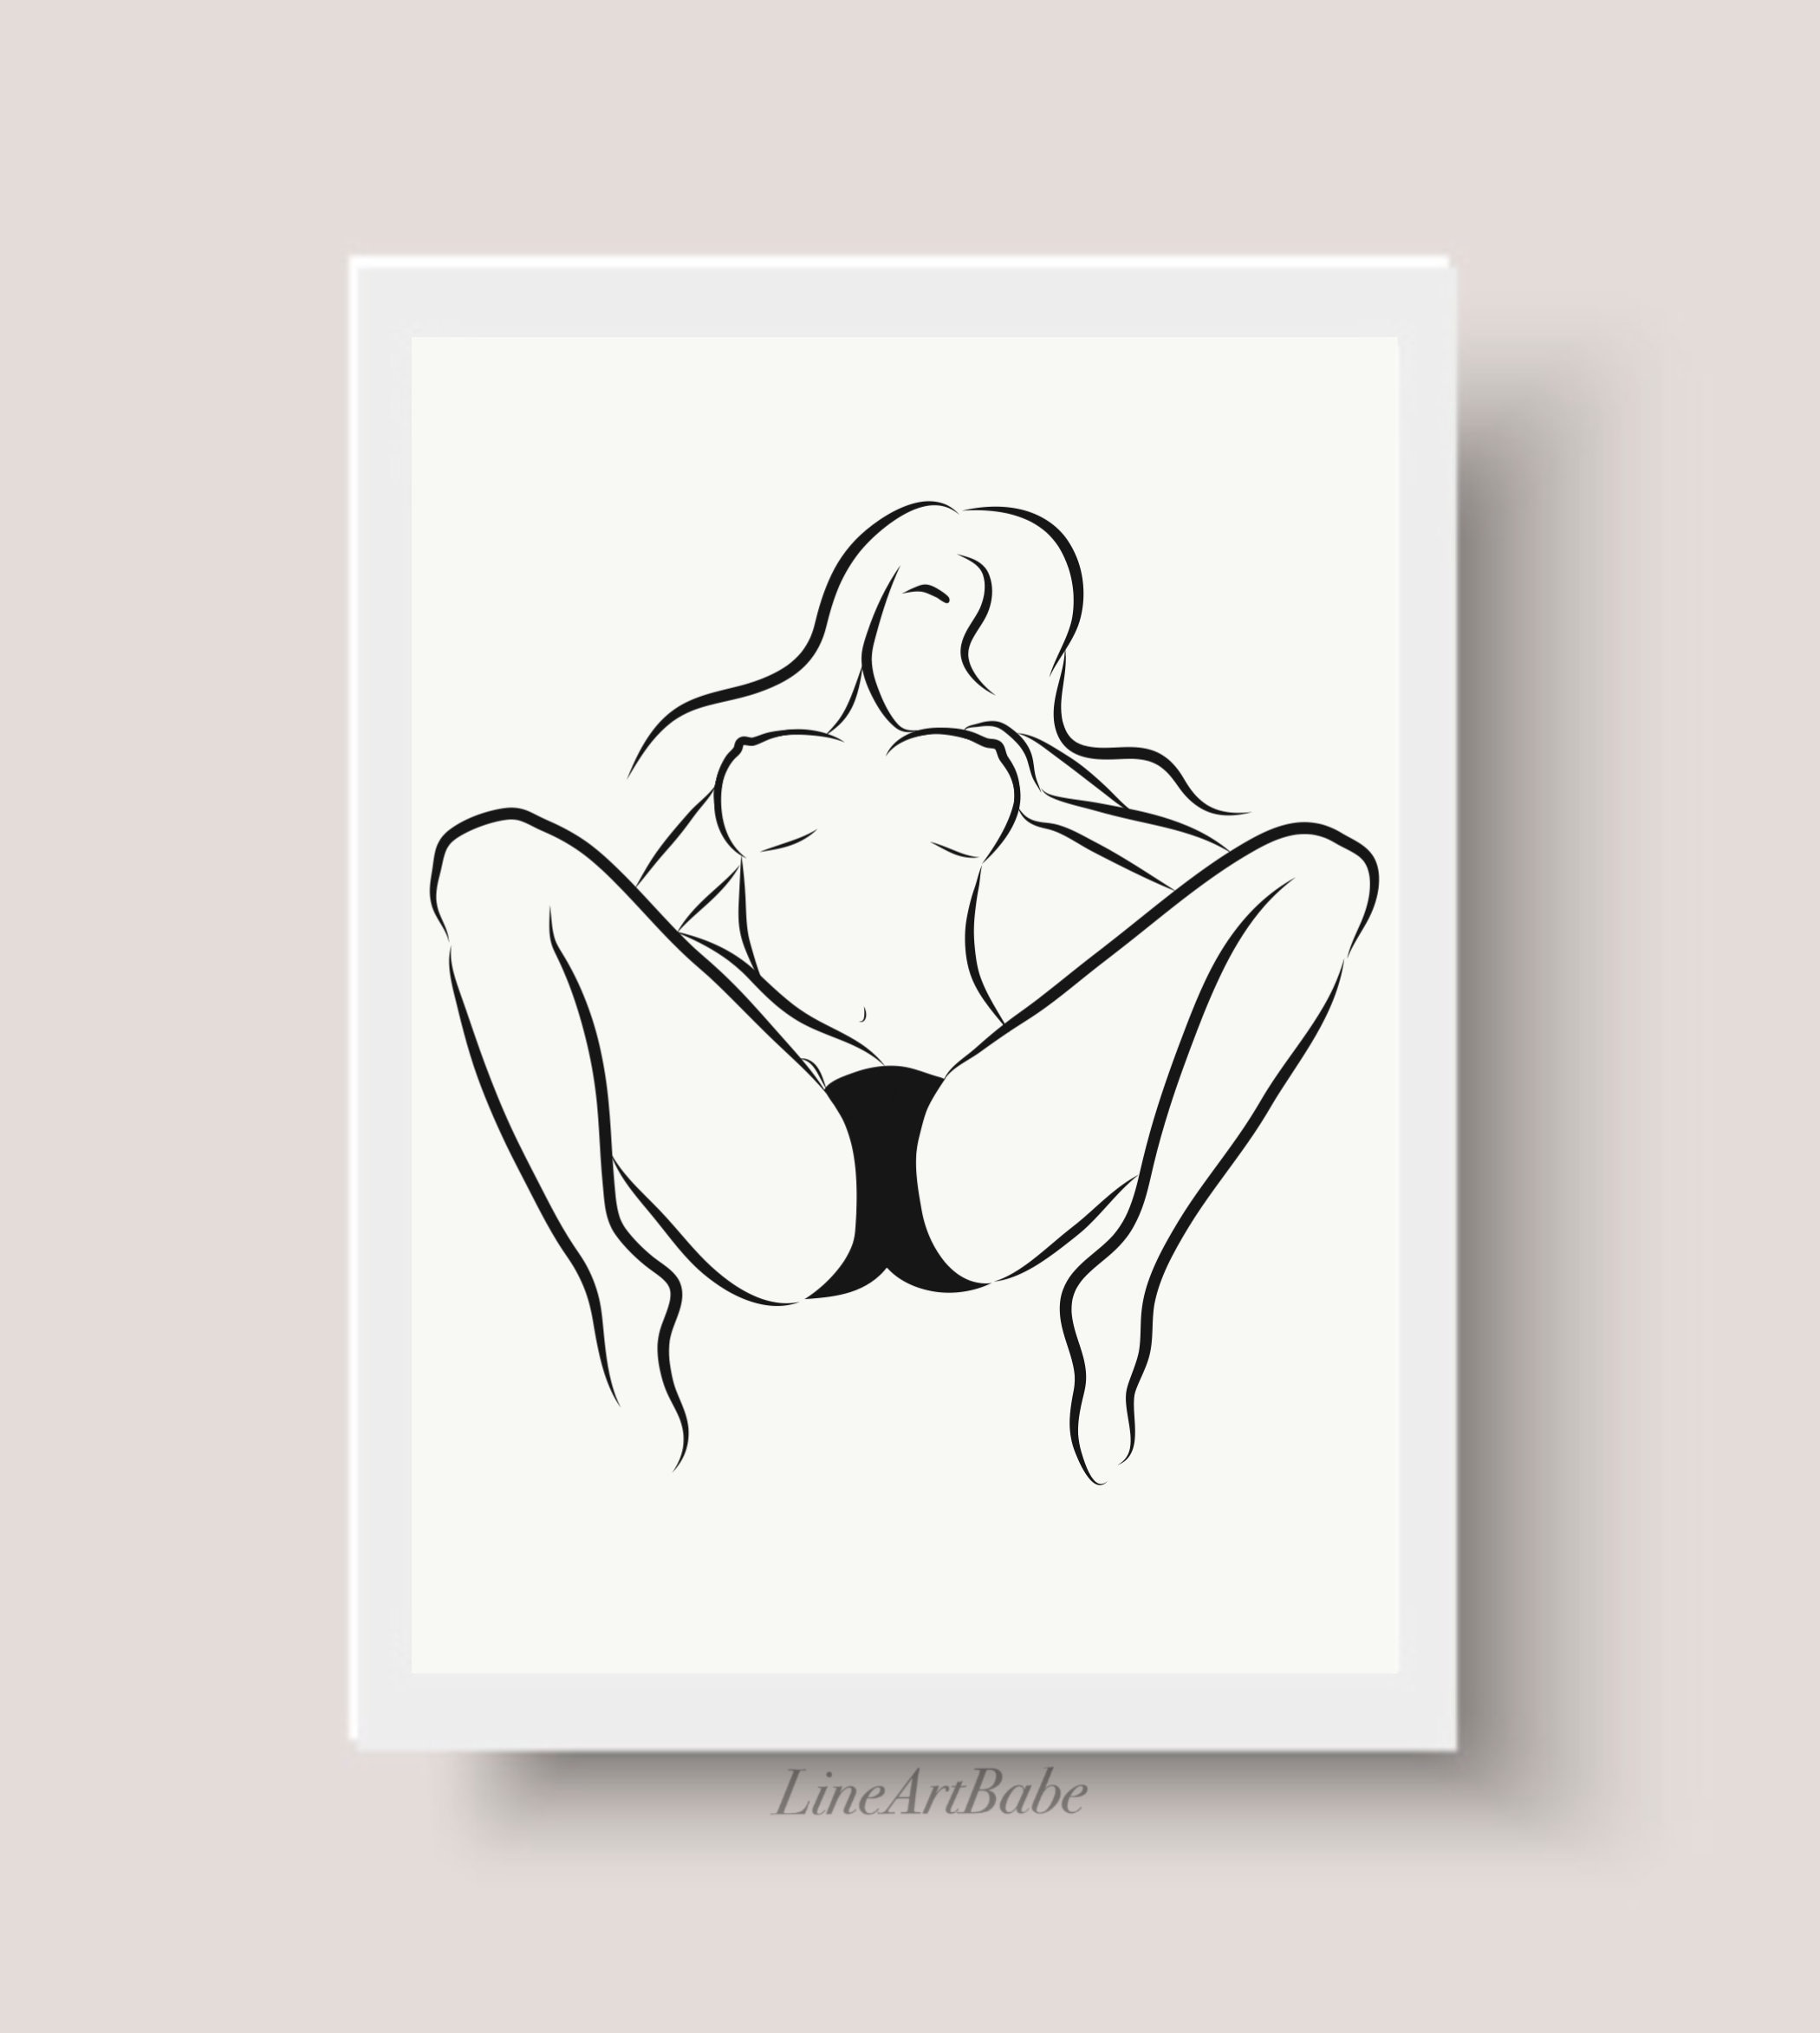 Sexy Line Art Print Woman Touching Herself Drawing picture